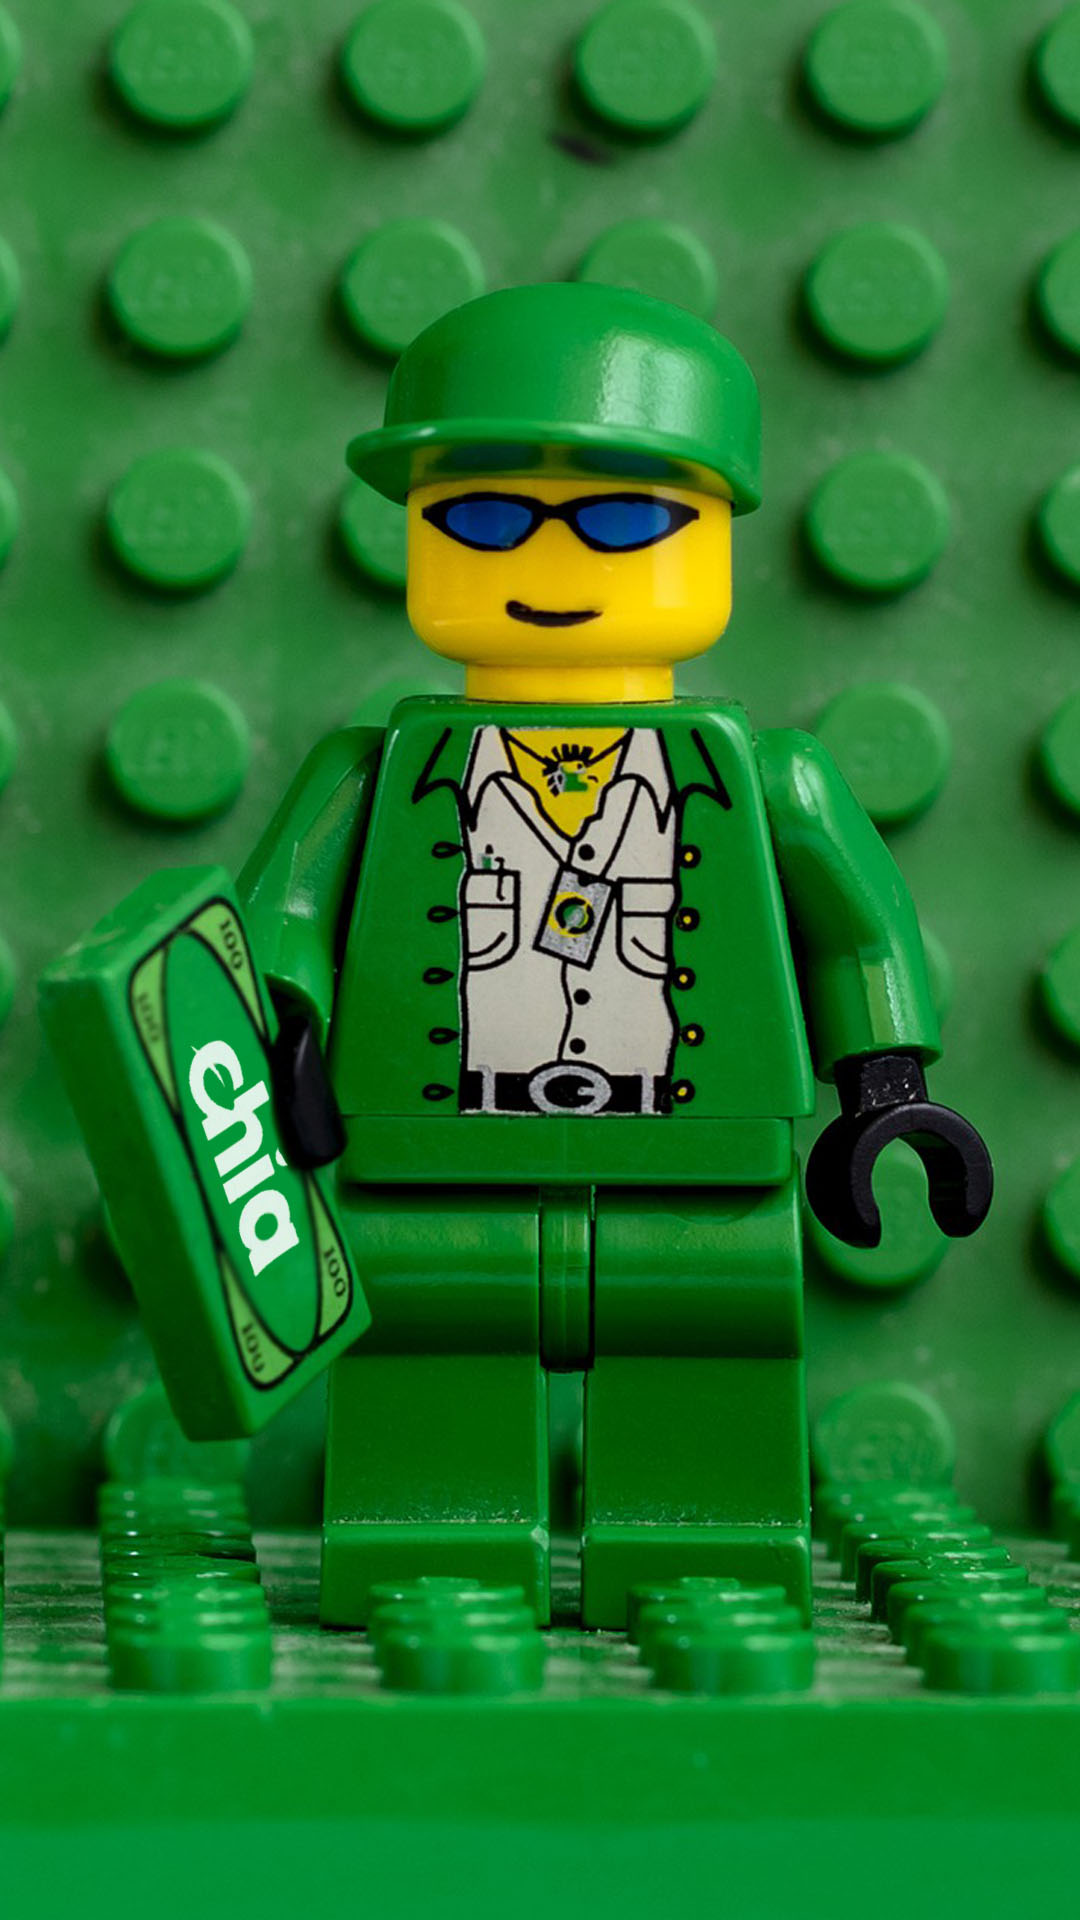 A lego farmer toy with a chia coin